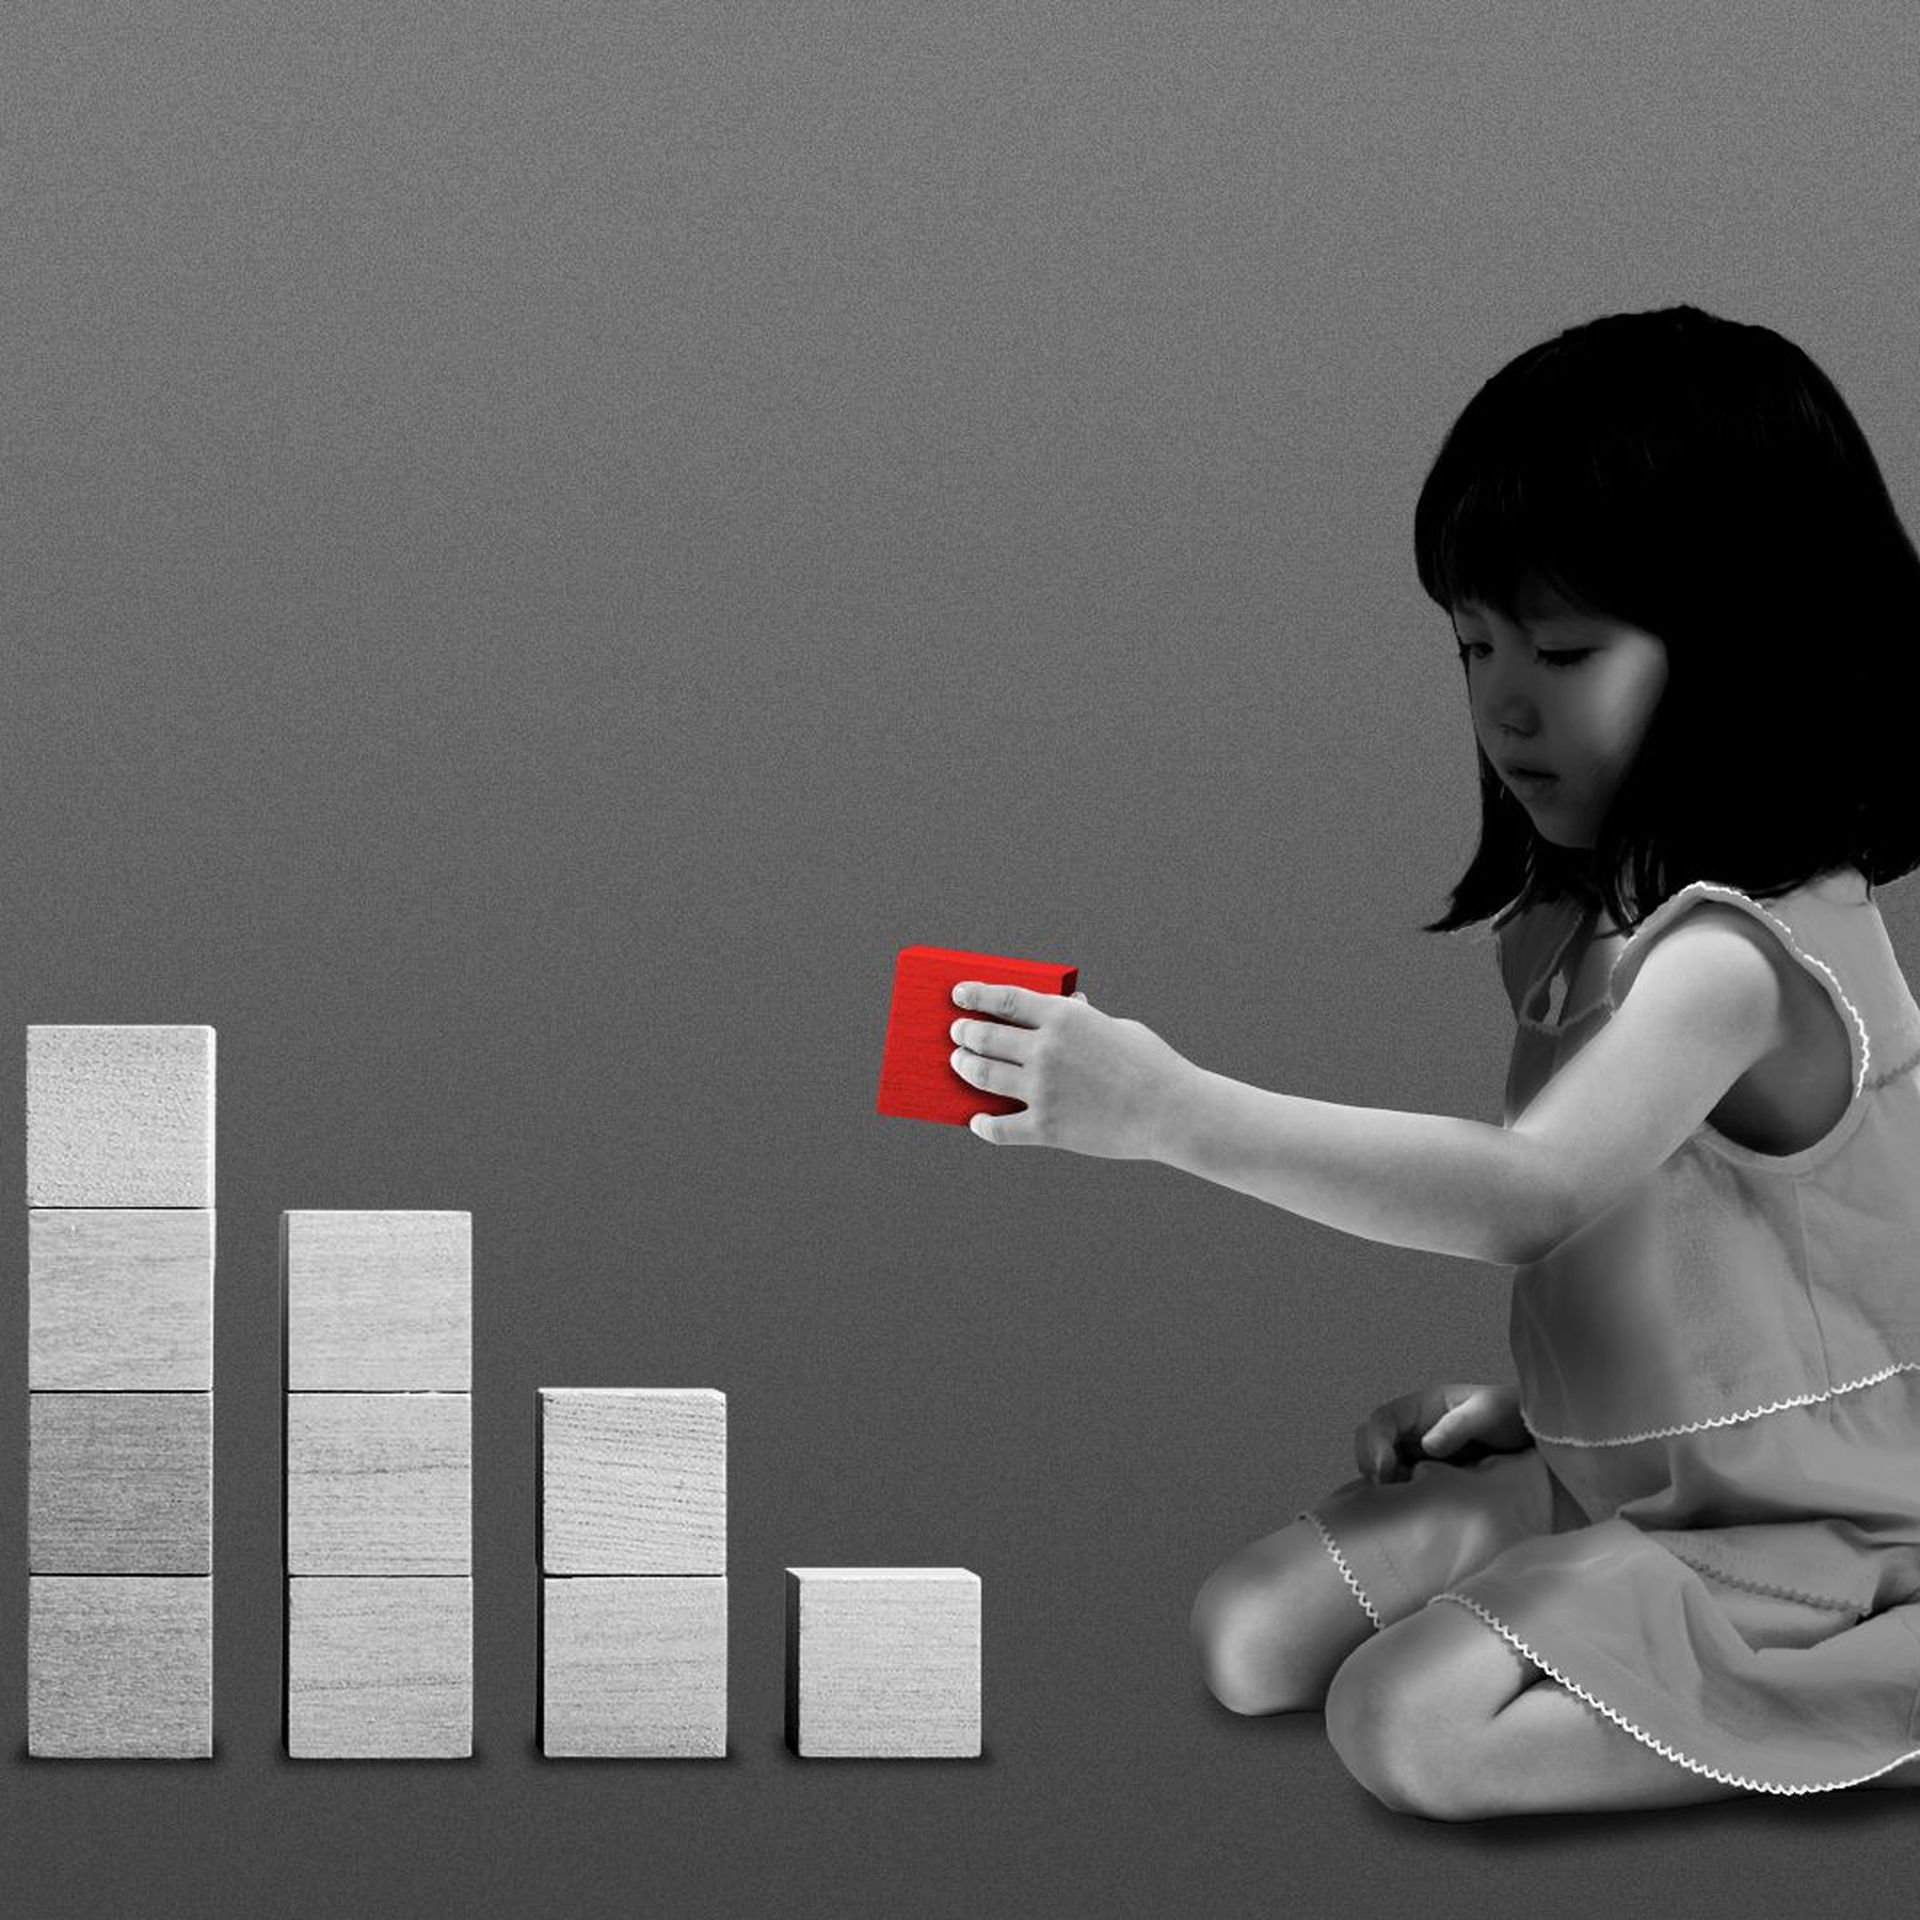 Illustration of a child sitting next to toy blocks arranged in a downward sloping bar chart